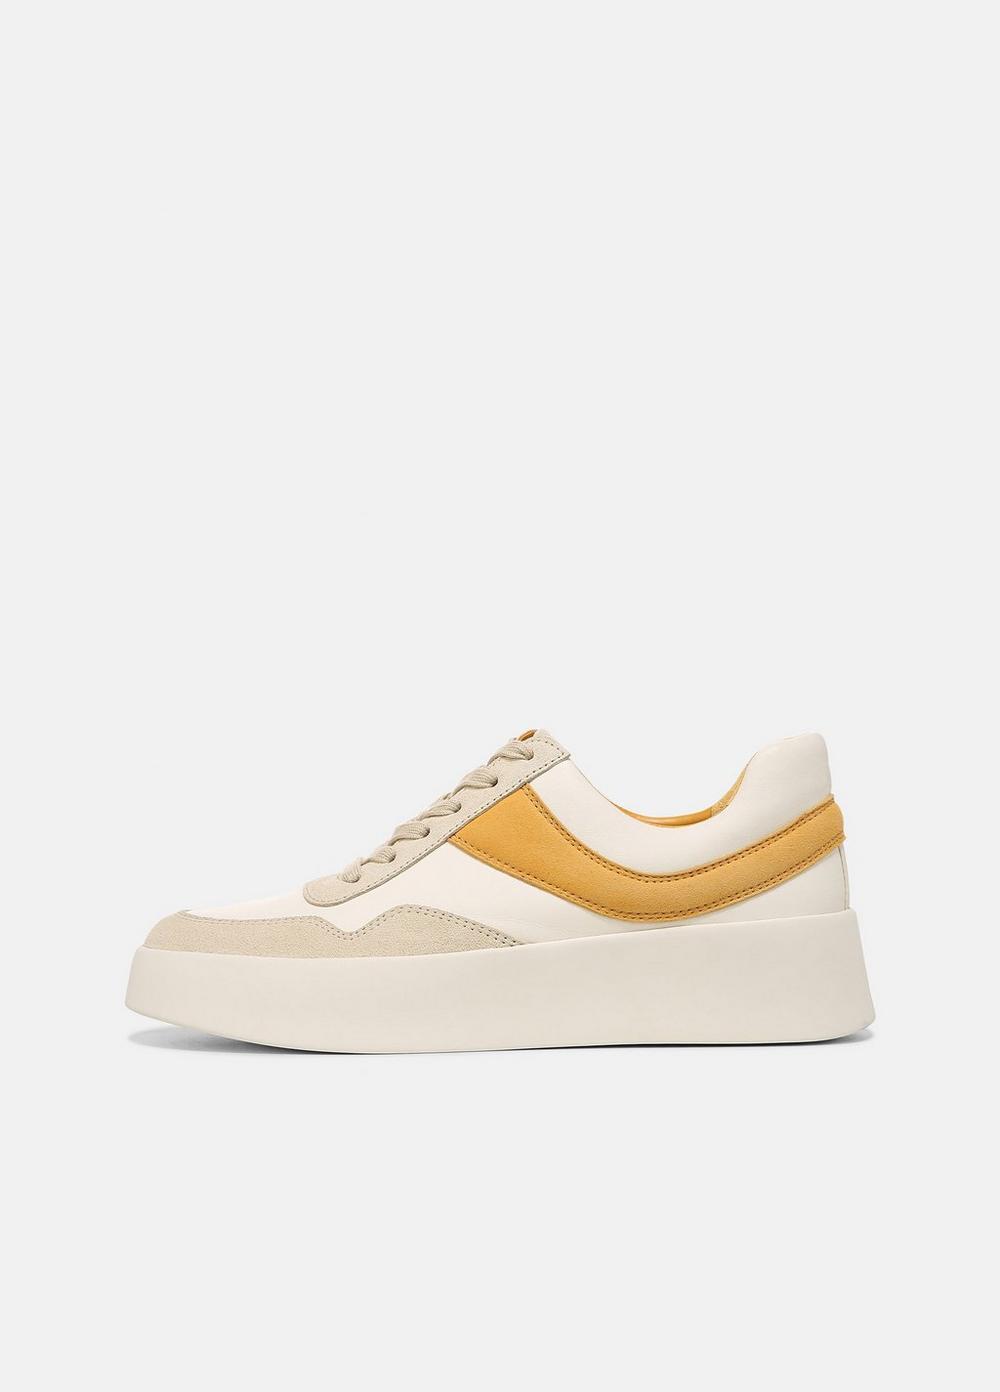 Vince Warren Court Leather And Suede Sneaker in White Lyst